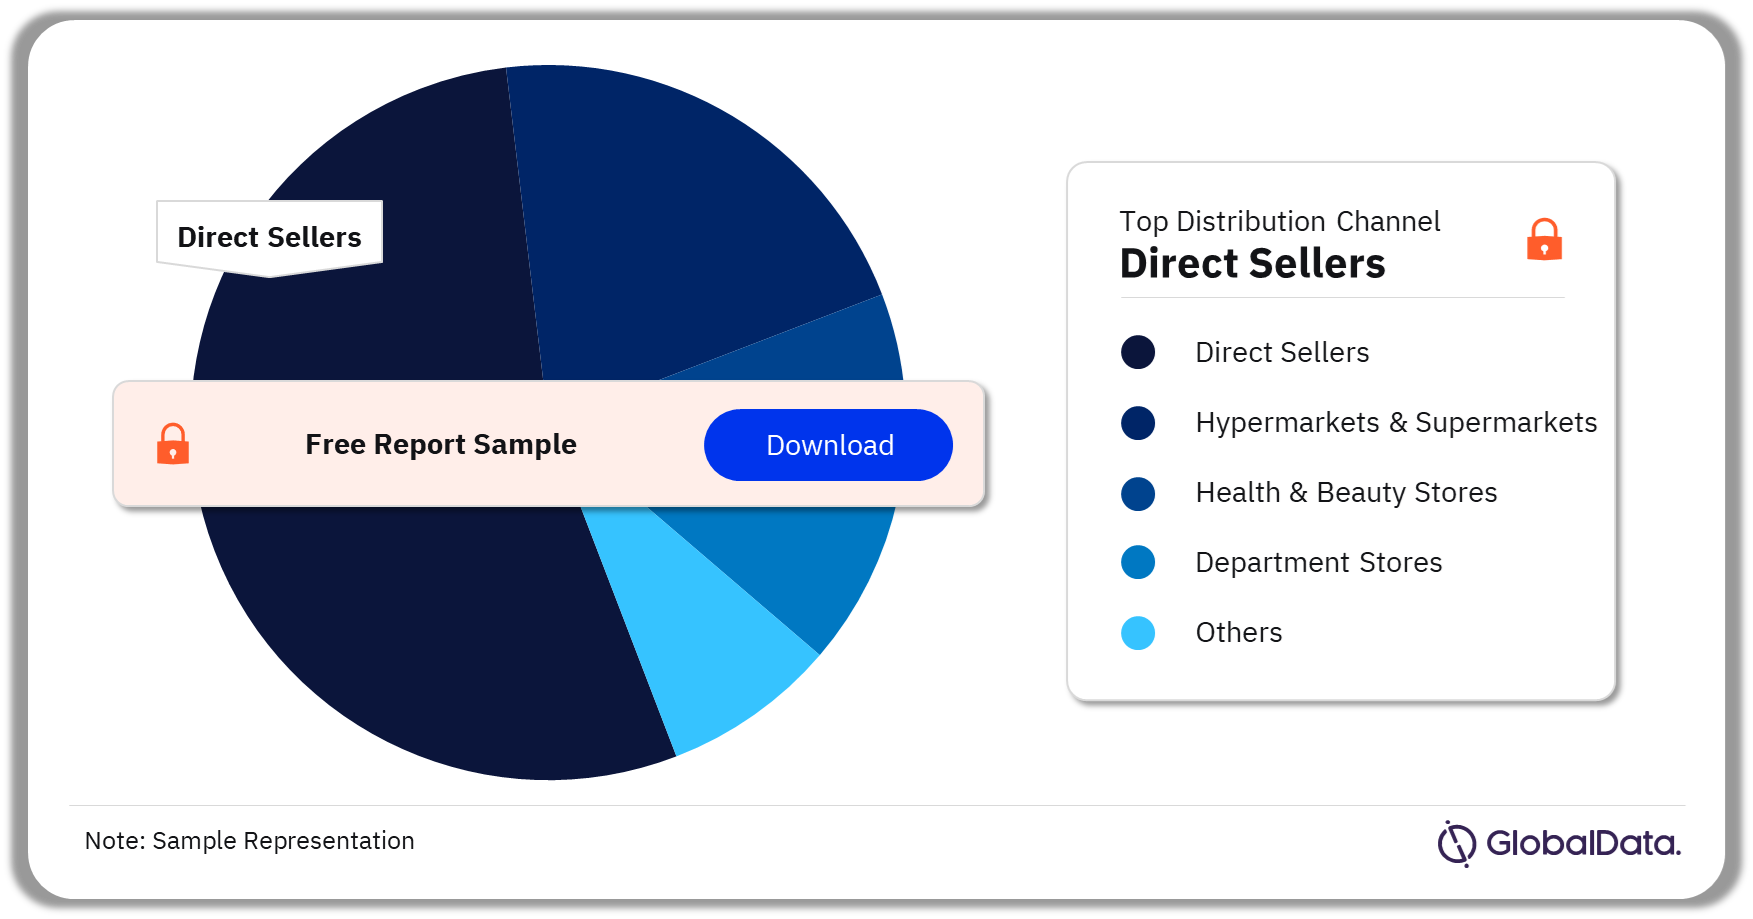 Argentina Make-up Market Analysis, by Distribution Channel, 2021 (%)